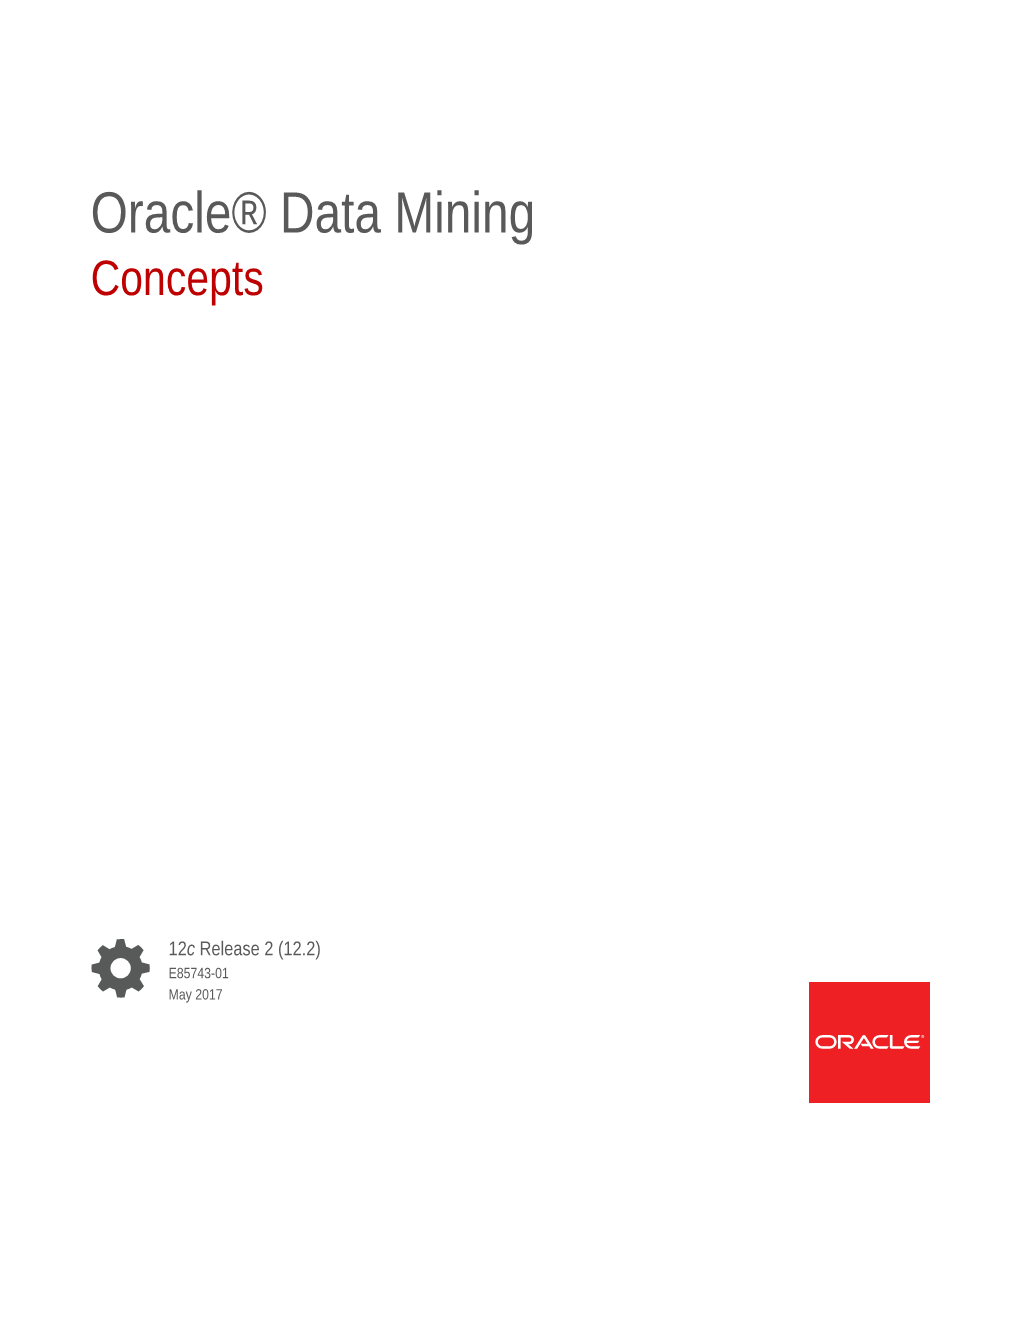 Oracle® Data Mining Concepts